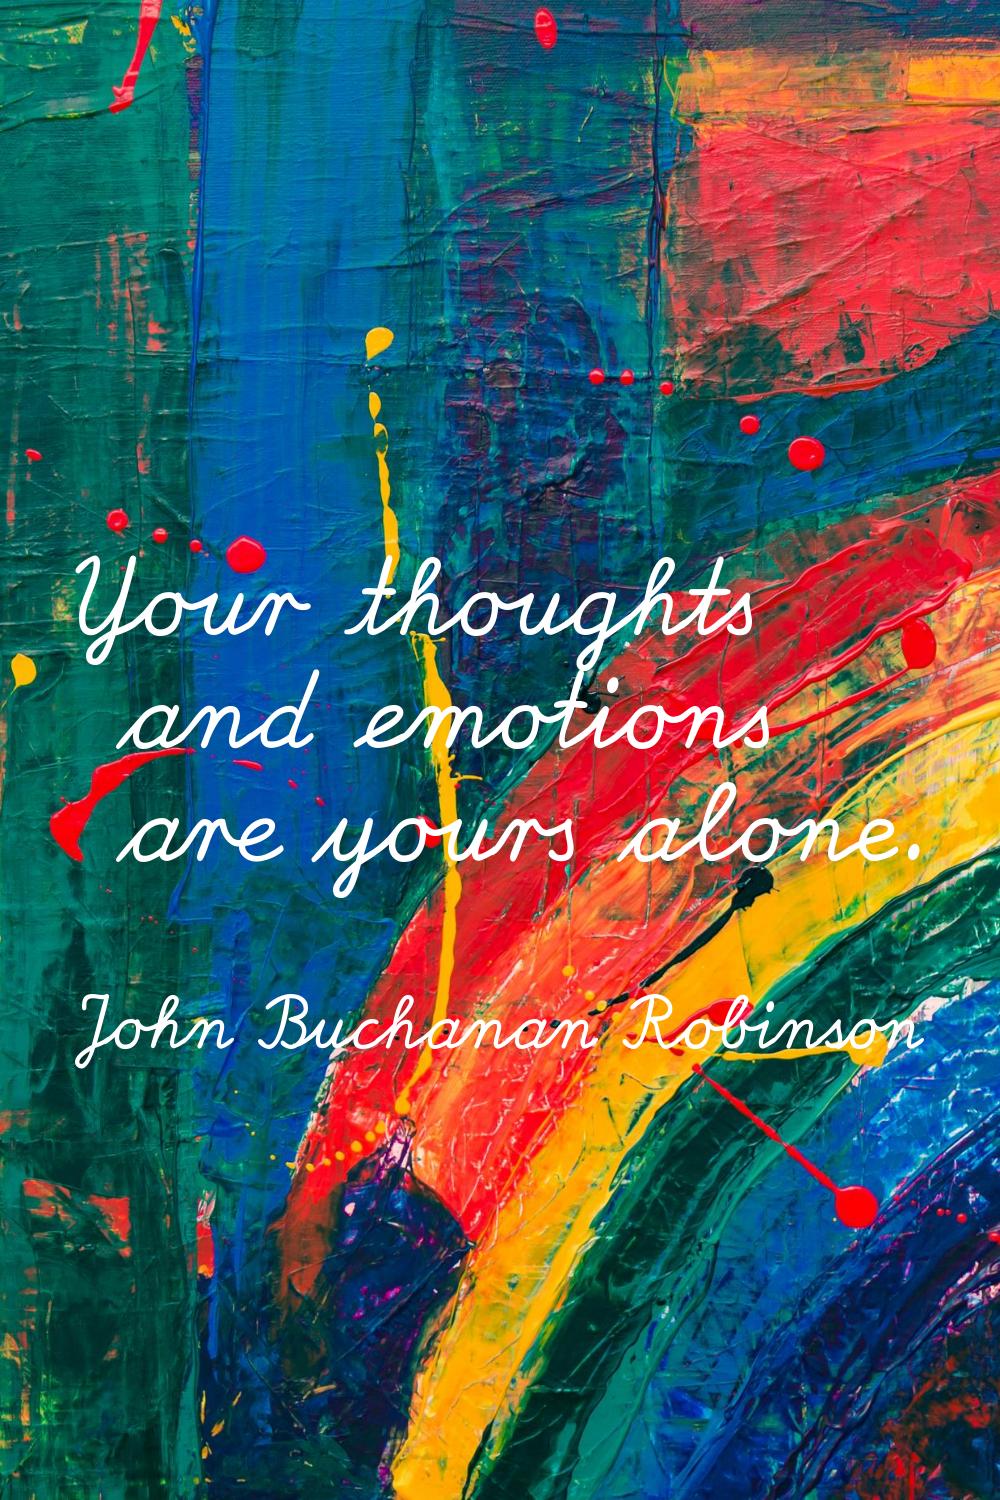 Your thoughts and emotions are yours alone.